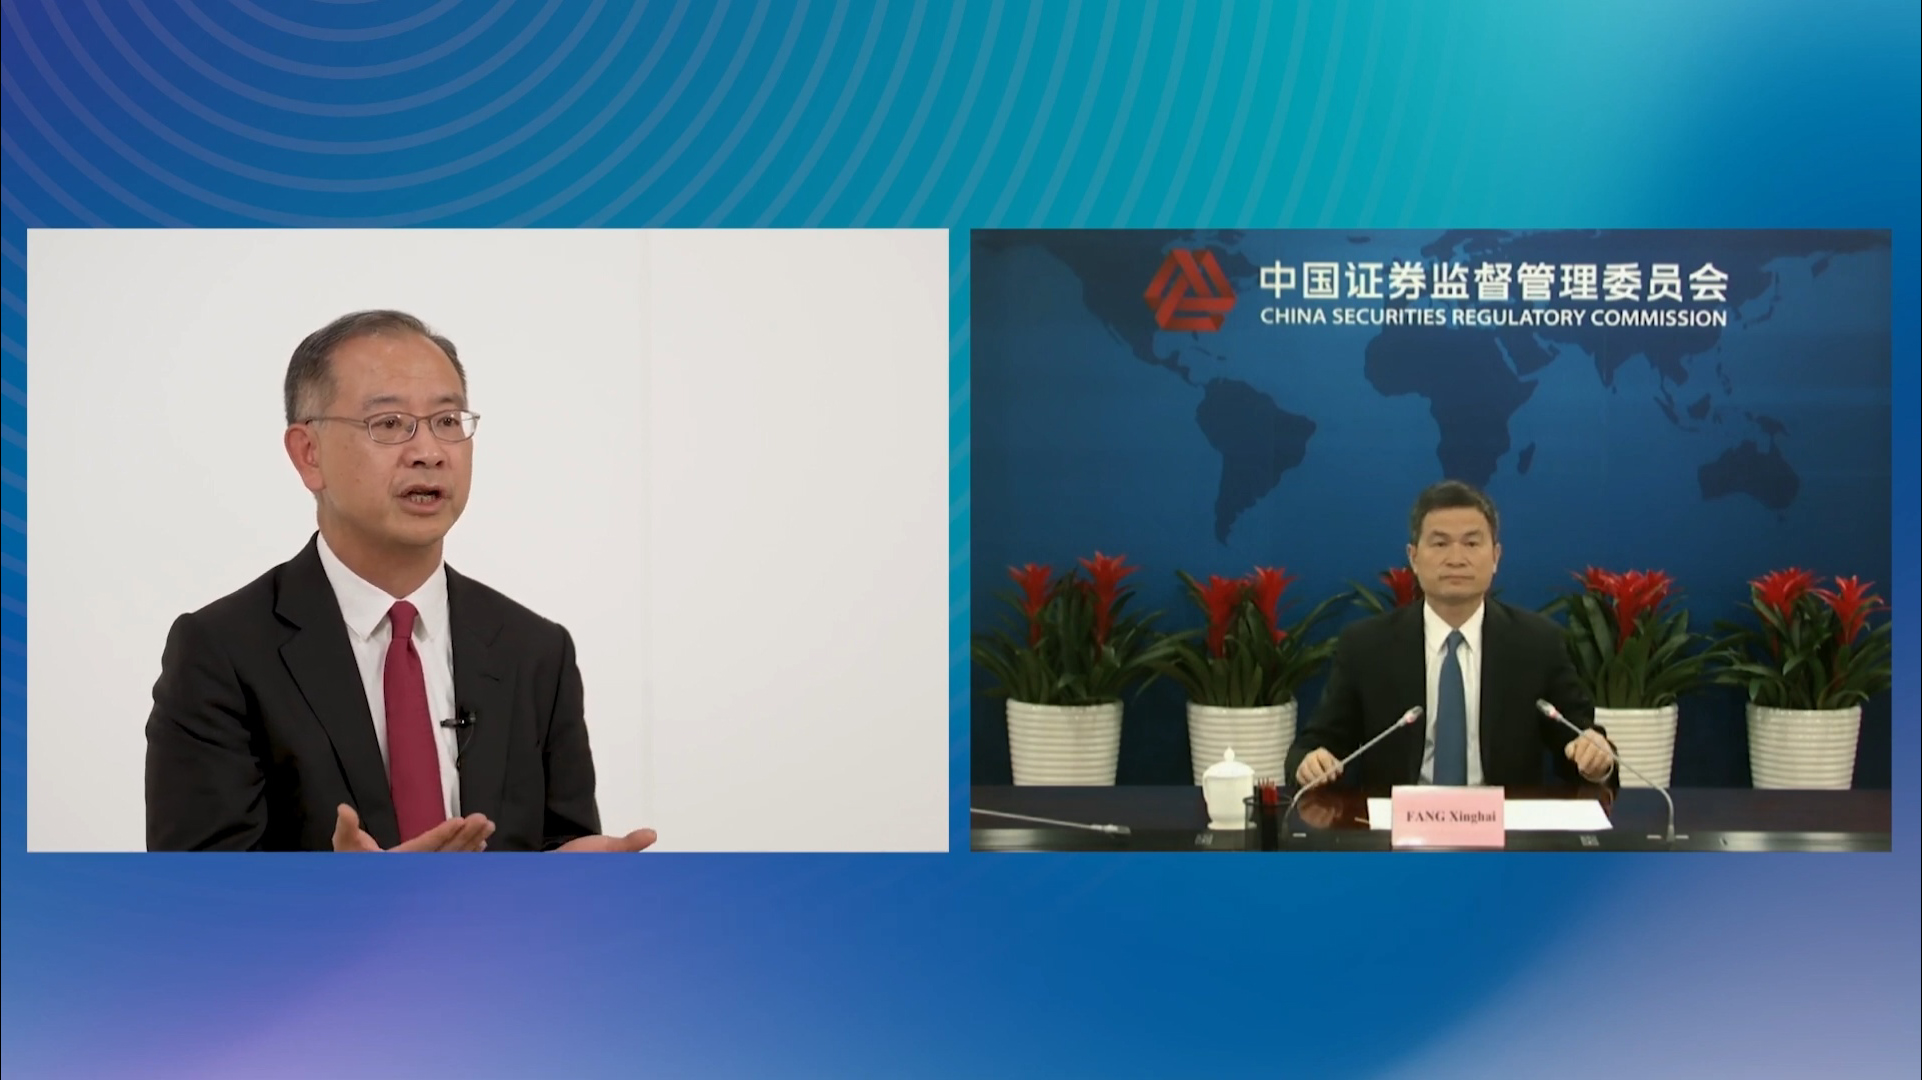 (From left to right) Eddie Yue, Chief Executive of Hong Kong Monetary Authority; FANG Xinghai, Vice Chairman of the China Securities Regulatory Commission